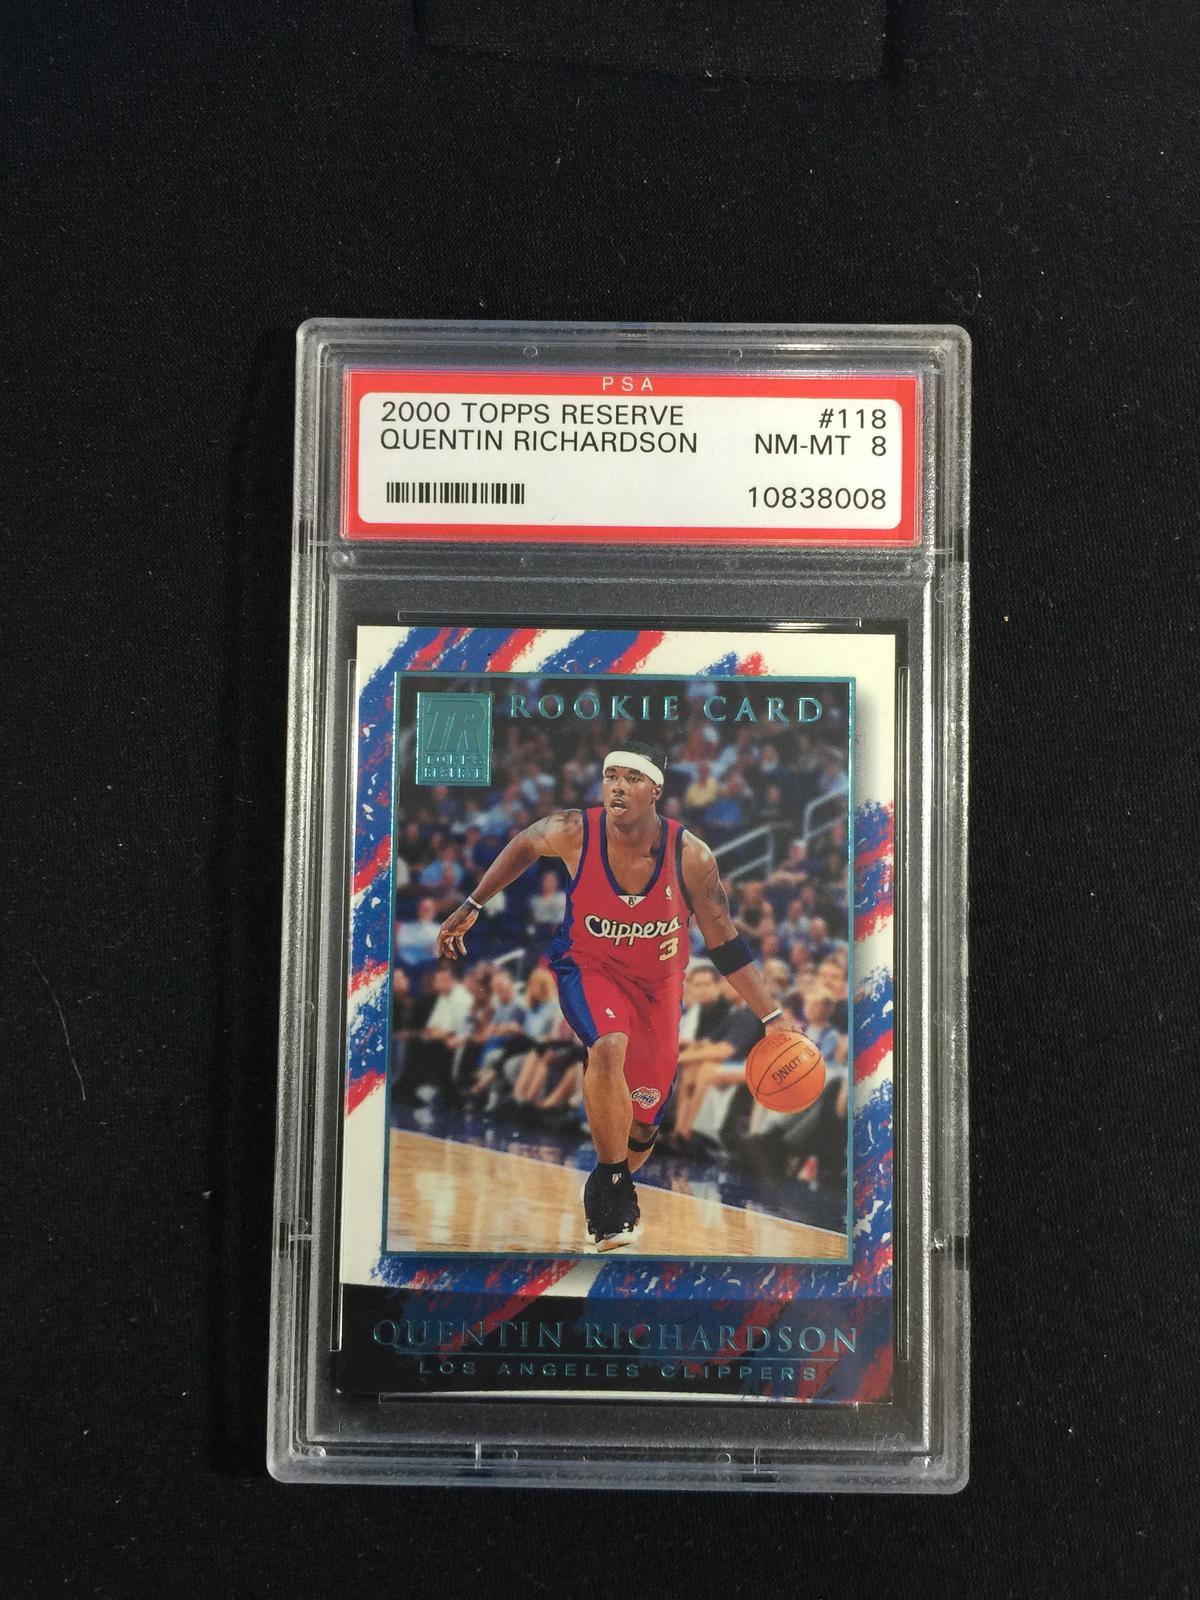 PSA Graded 2000 Topps Reserve Quentin Richardson Rookie Basketball Card